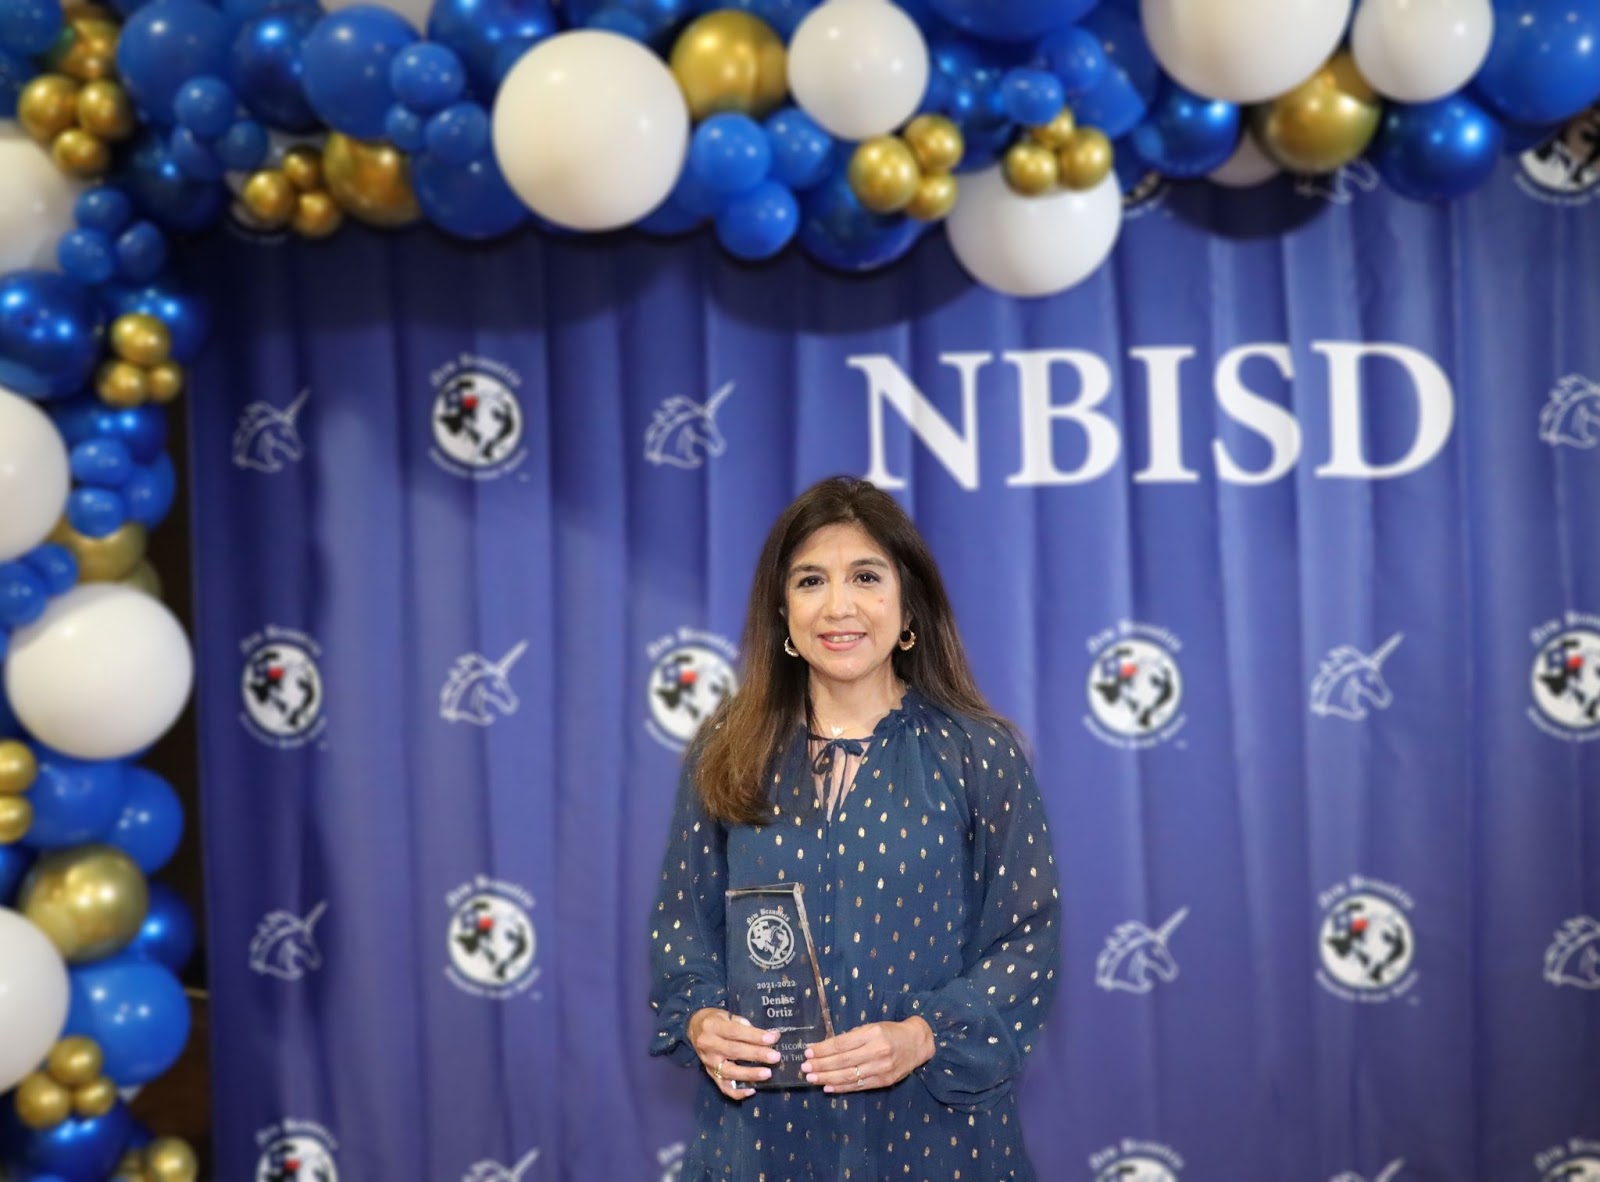 Denise Ortiz was announced as Secondary Teacher of the Year